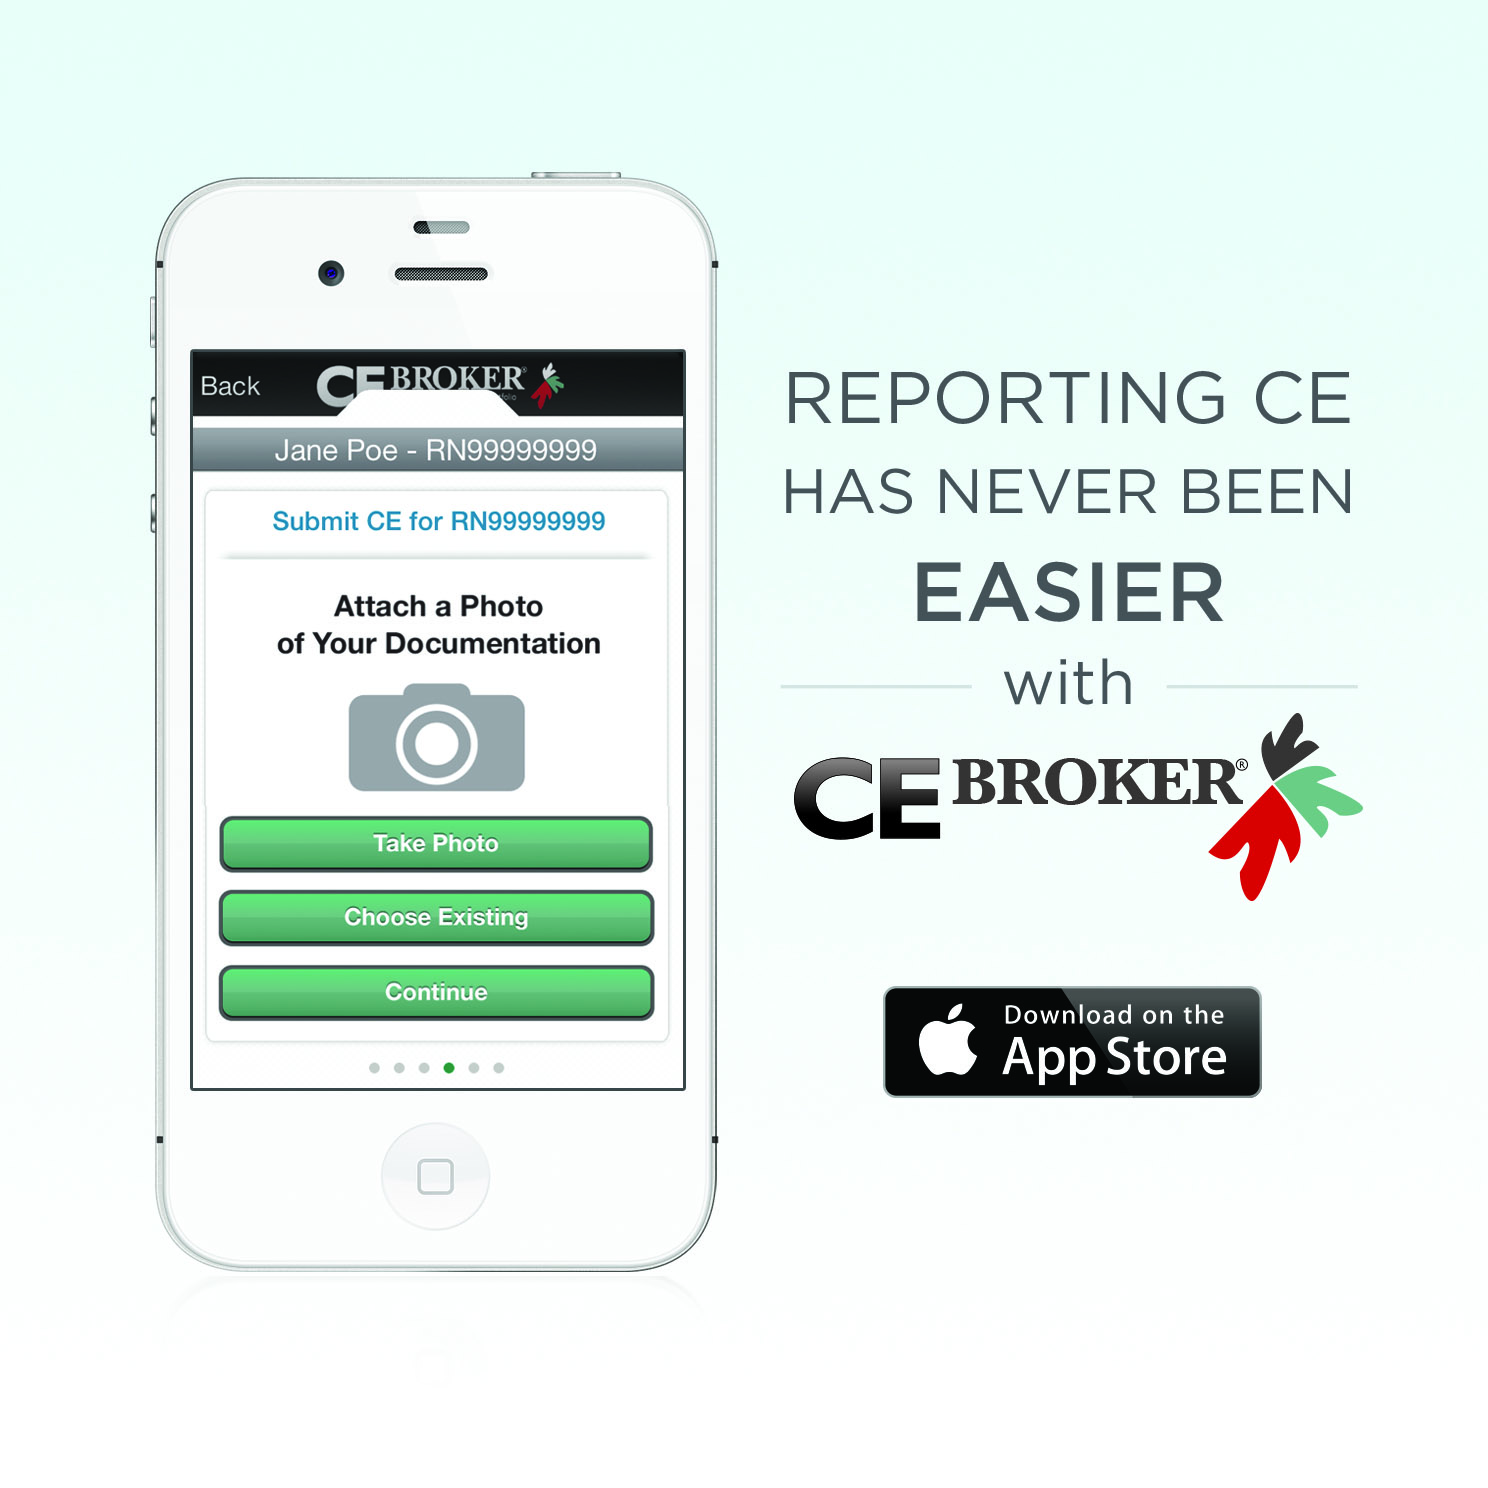 Reporting CE Has Never Been Easier.